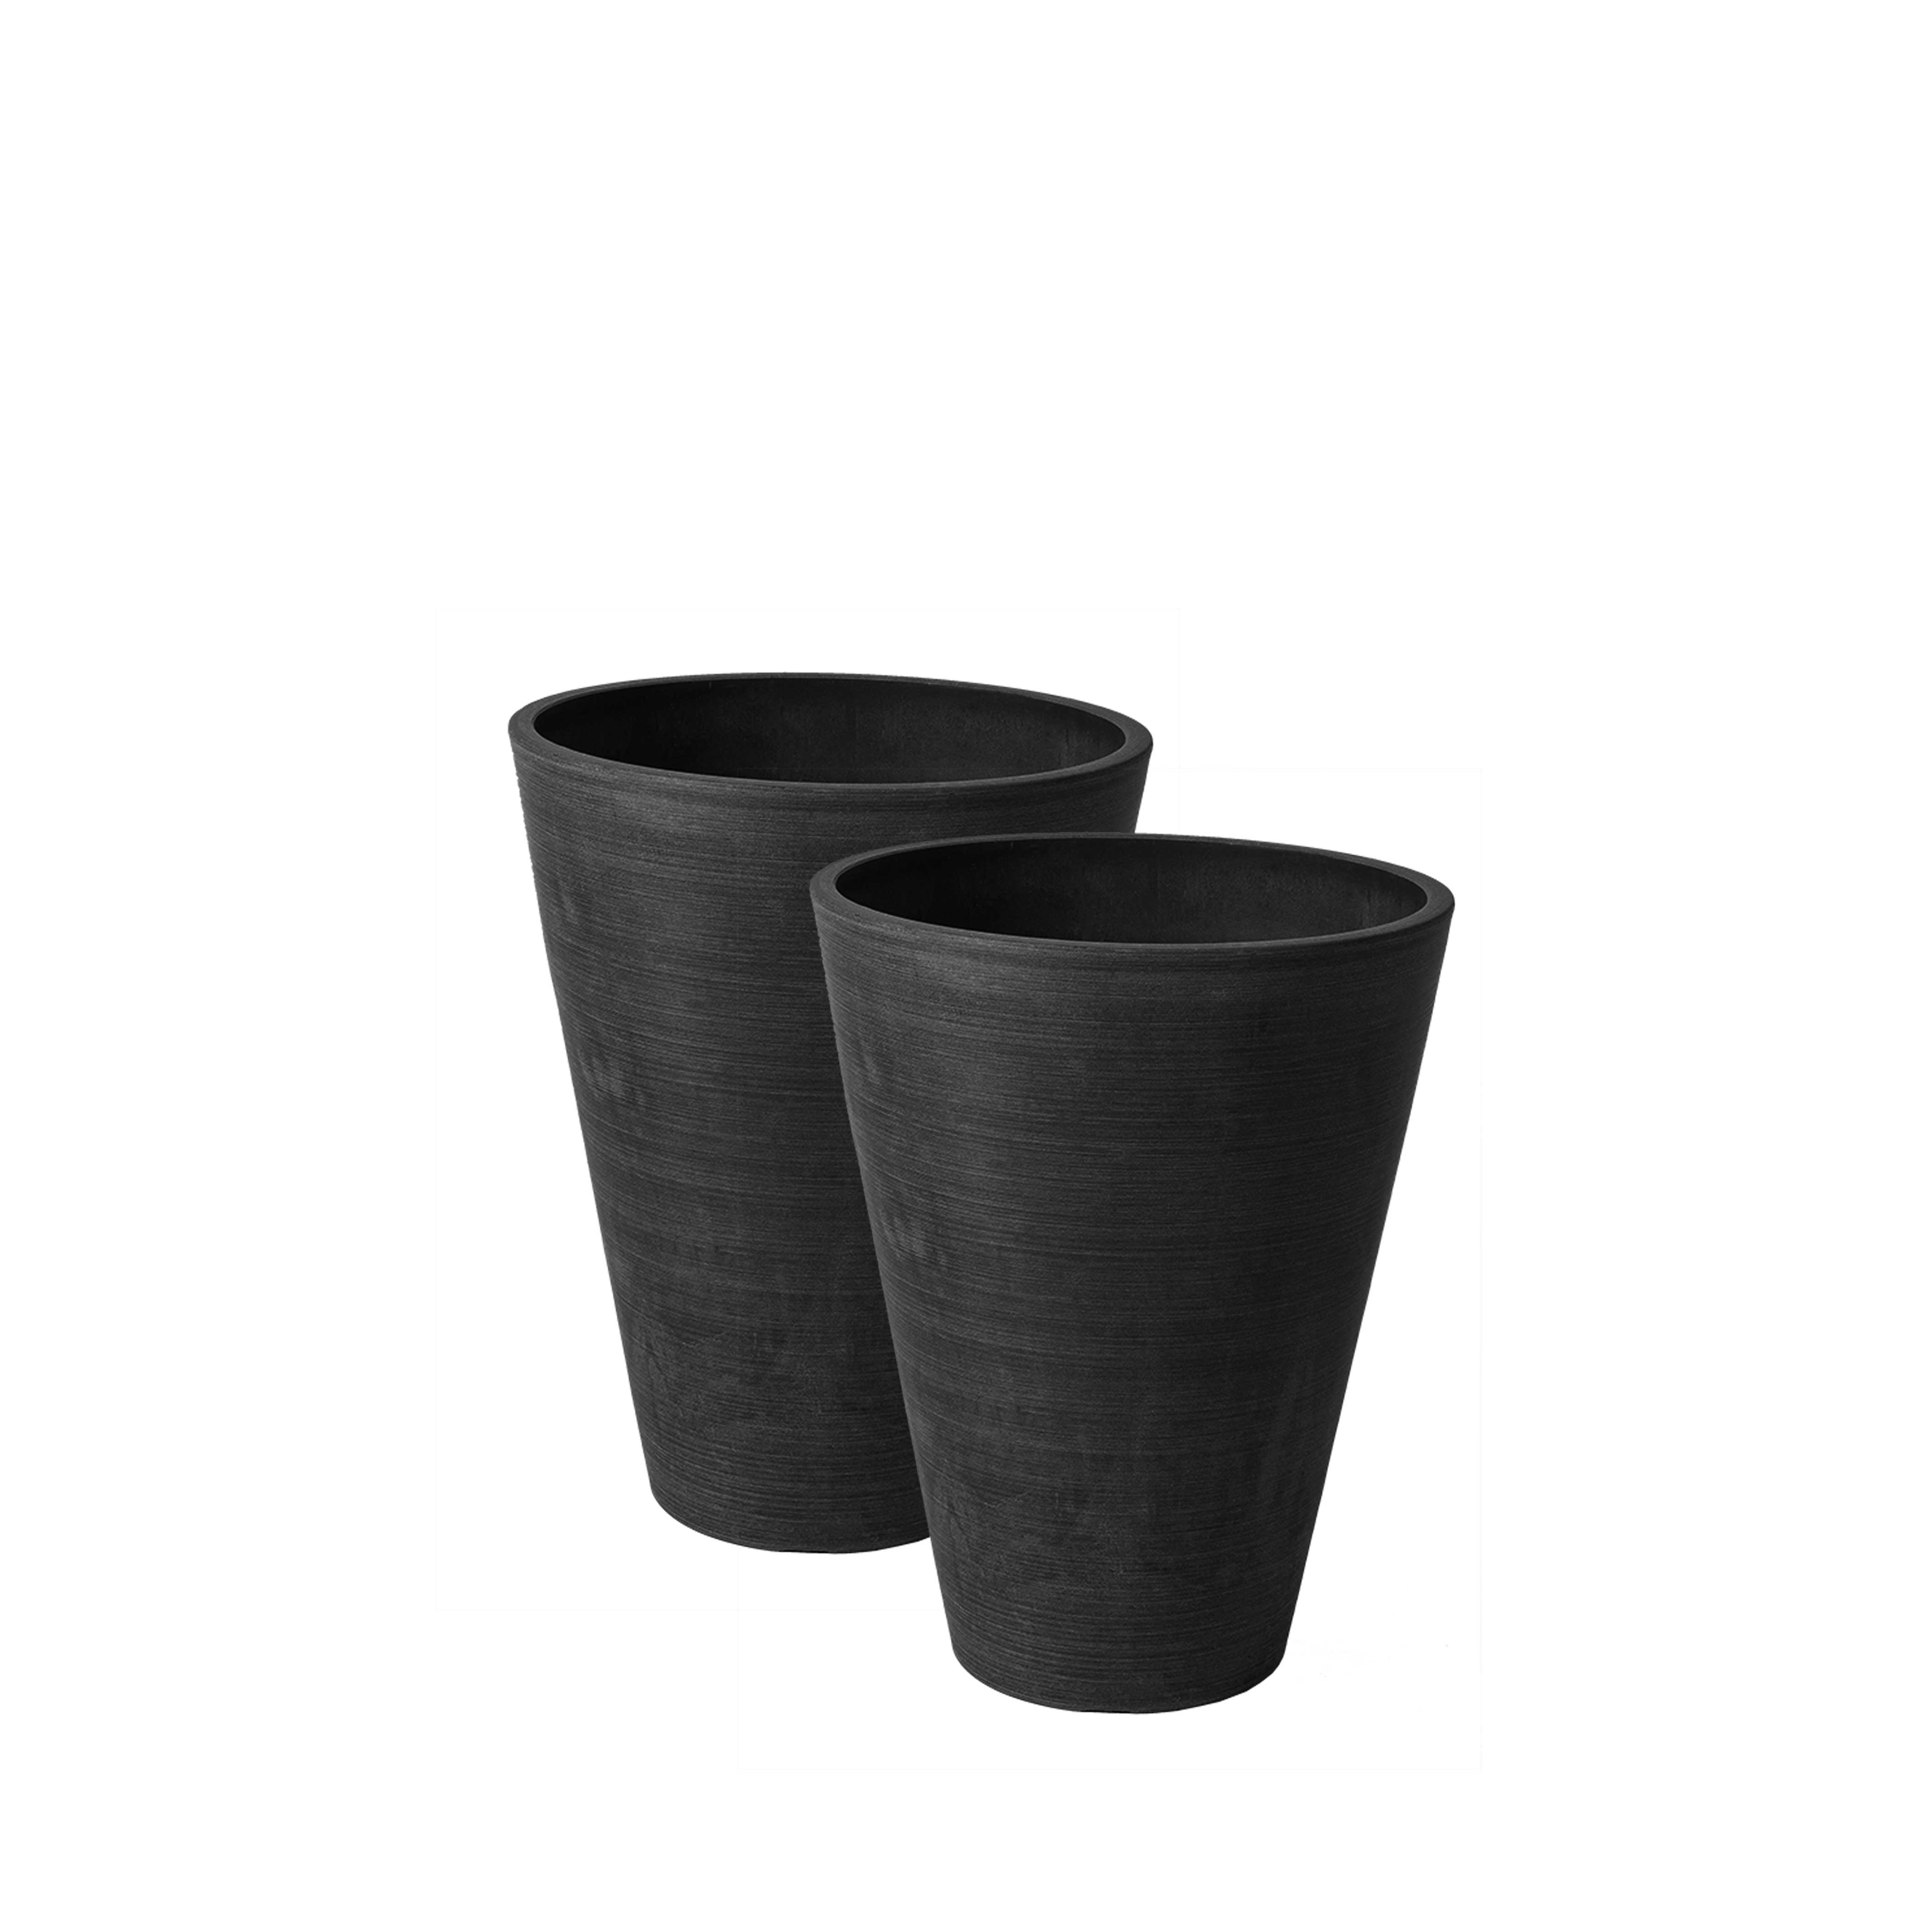 16326 Valencia 10 In. Dia. By 13 In. 2 Round Taper Planters, Spun Black - Pack Of 2